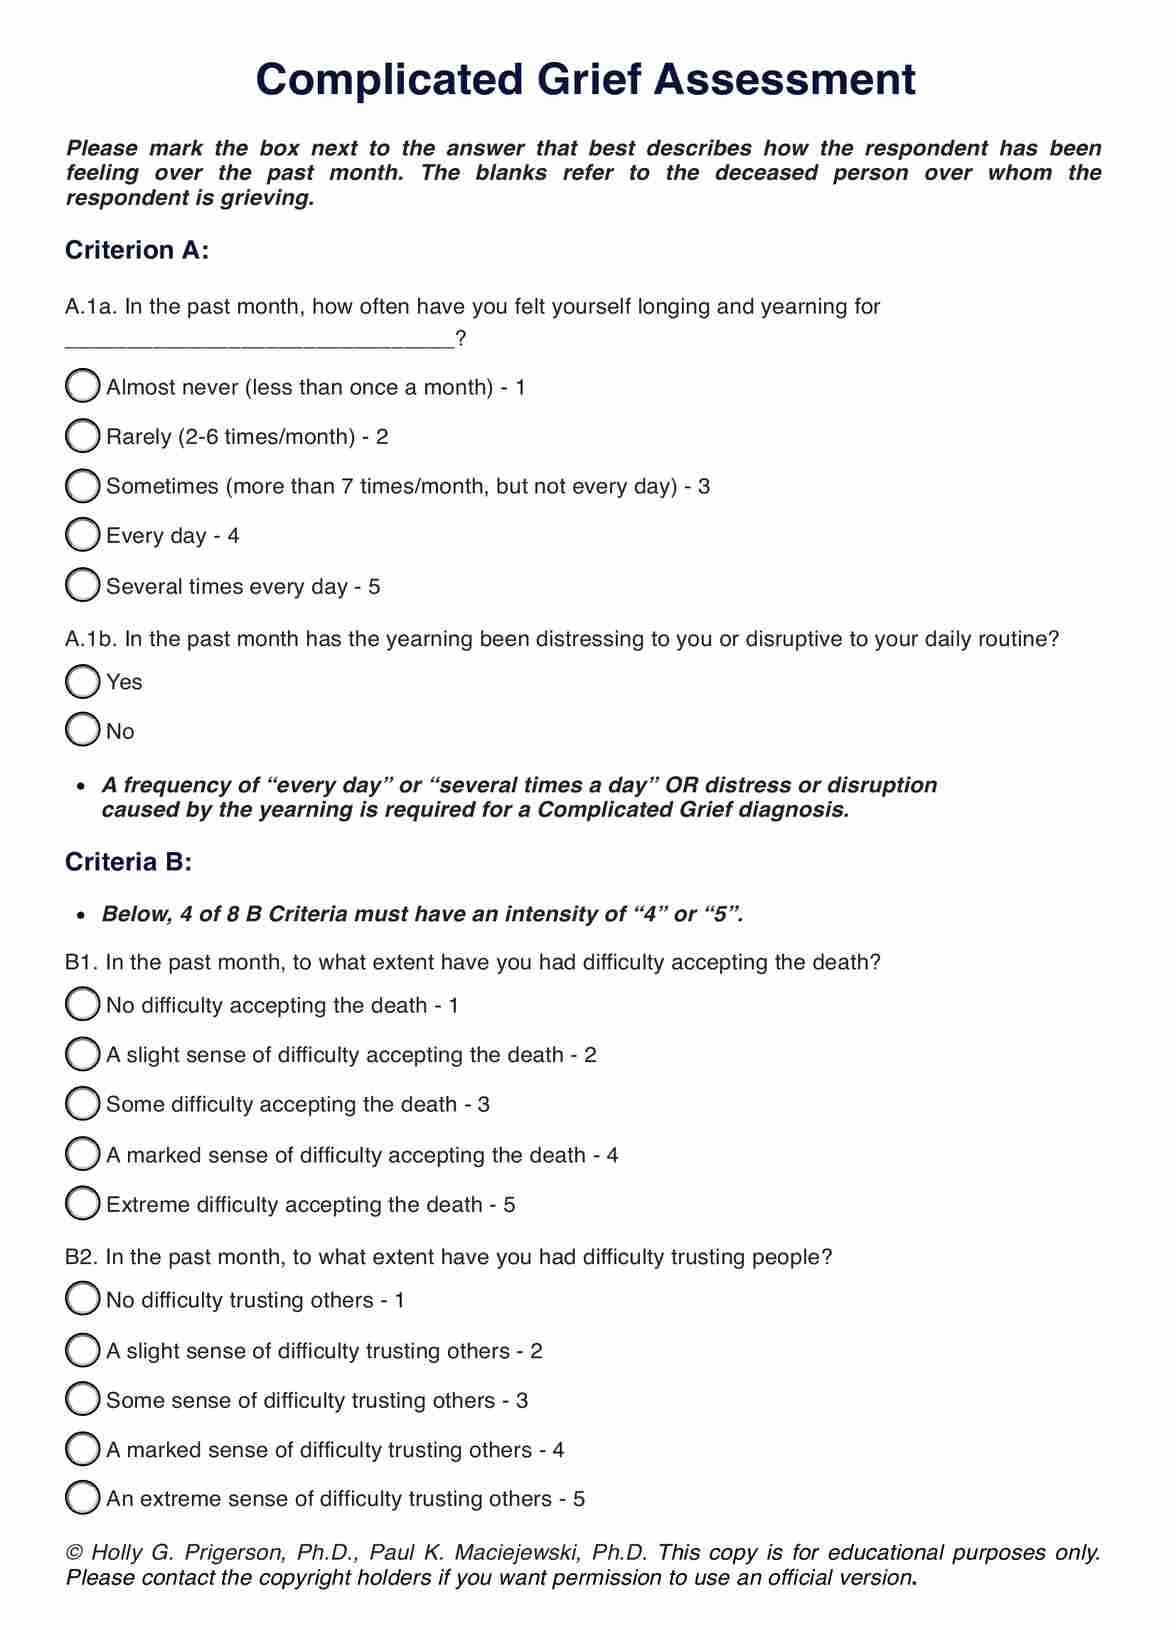 Complicated Grief Disorder Test PDF Example